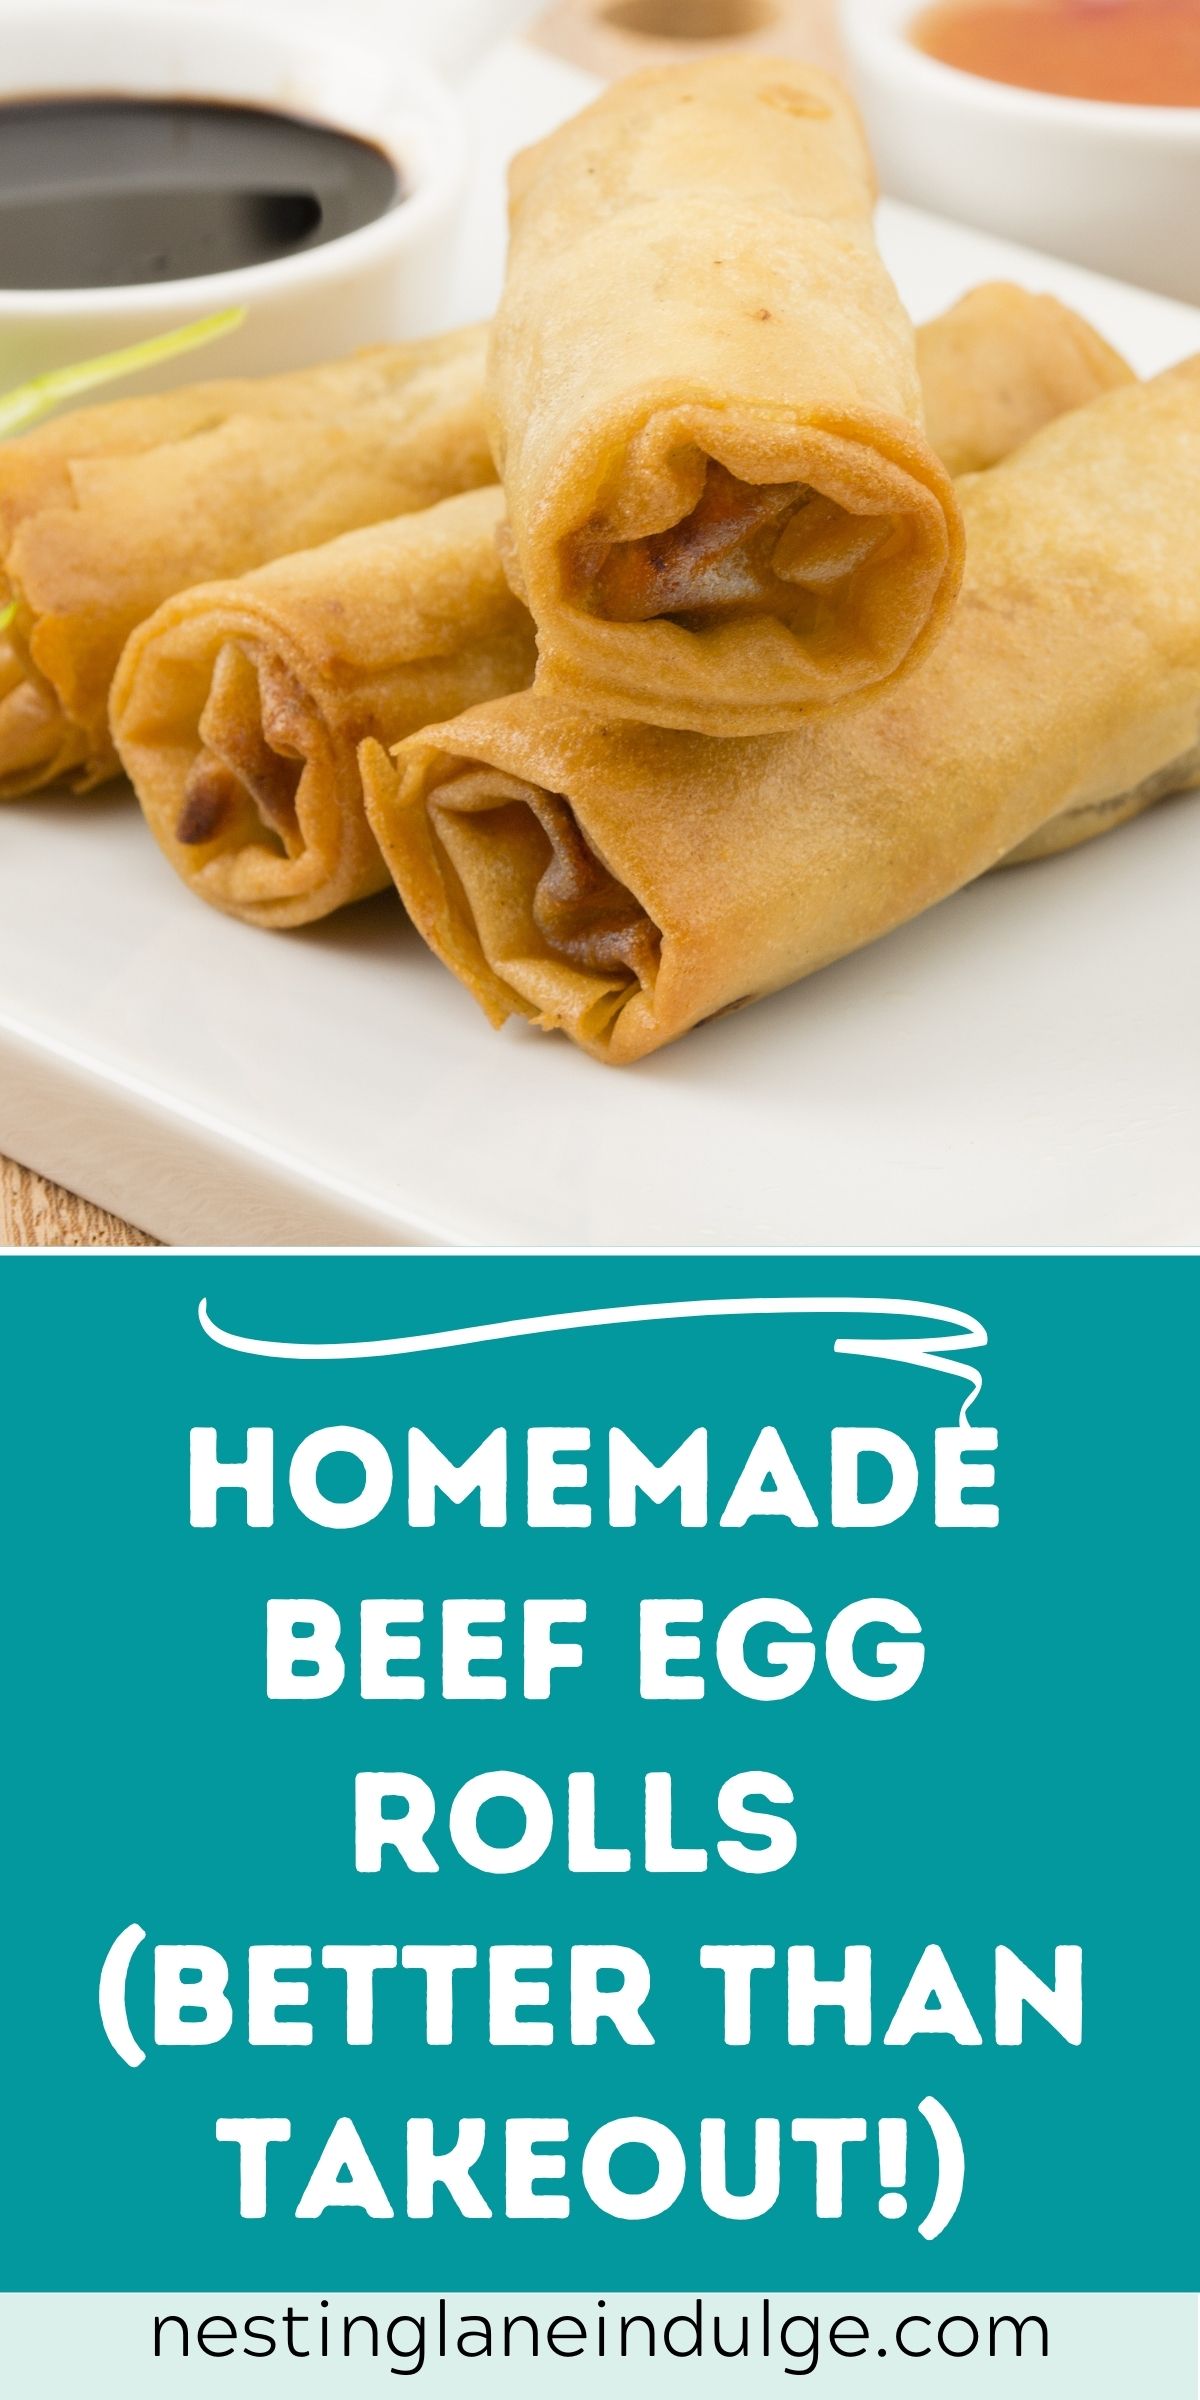 Graphic for Pinterest of Homemade Beef Egg Rolls (Better Than Takeout!) Recipe.